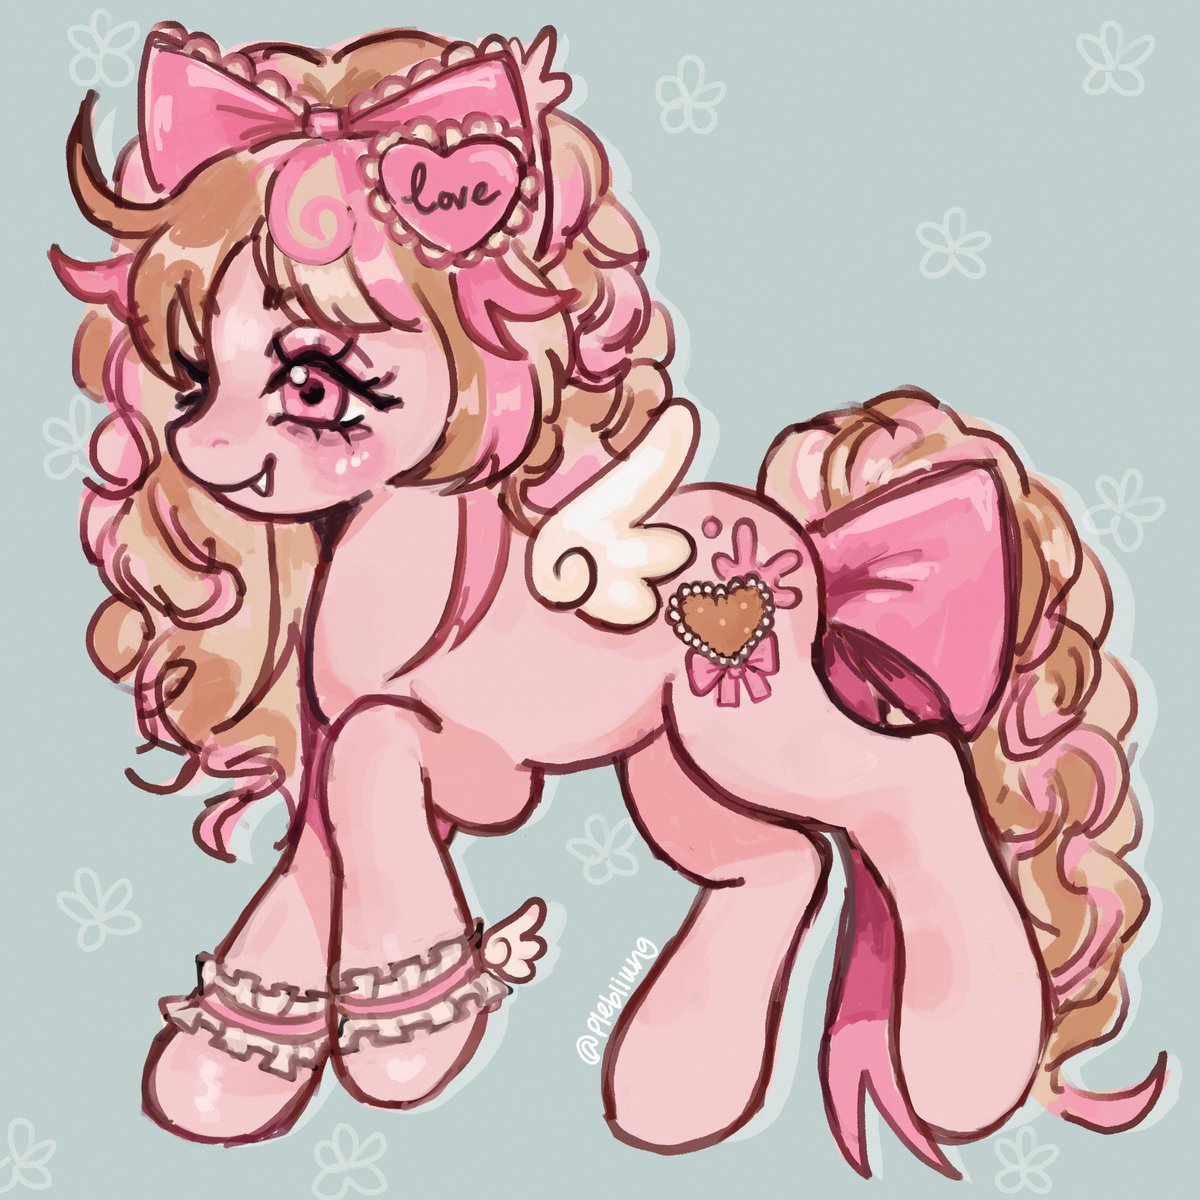 drawing of @tarteaumiau’s oc | couldn’t resist drawing their oc 💗

#mlp #mylittlepony #mlpfanart #mlpoc